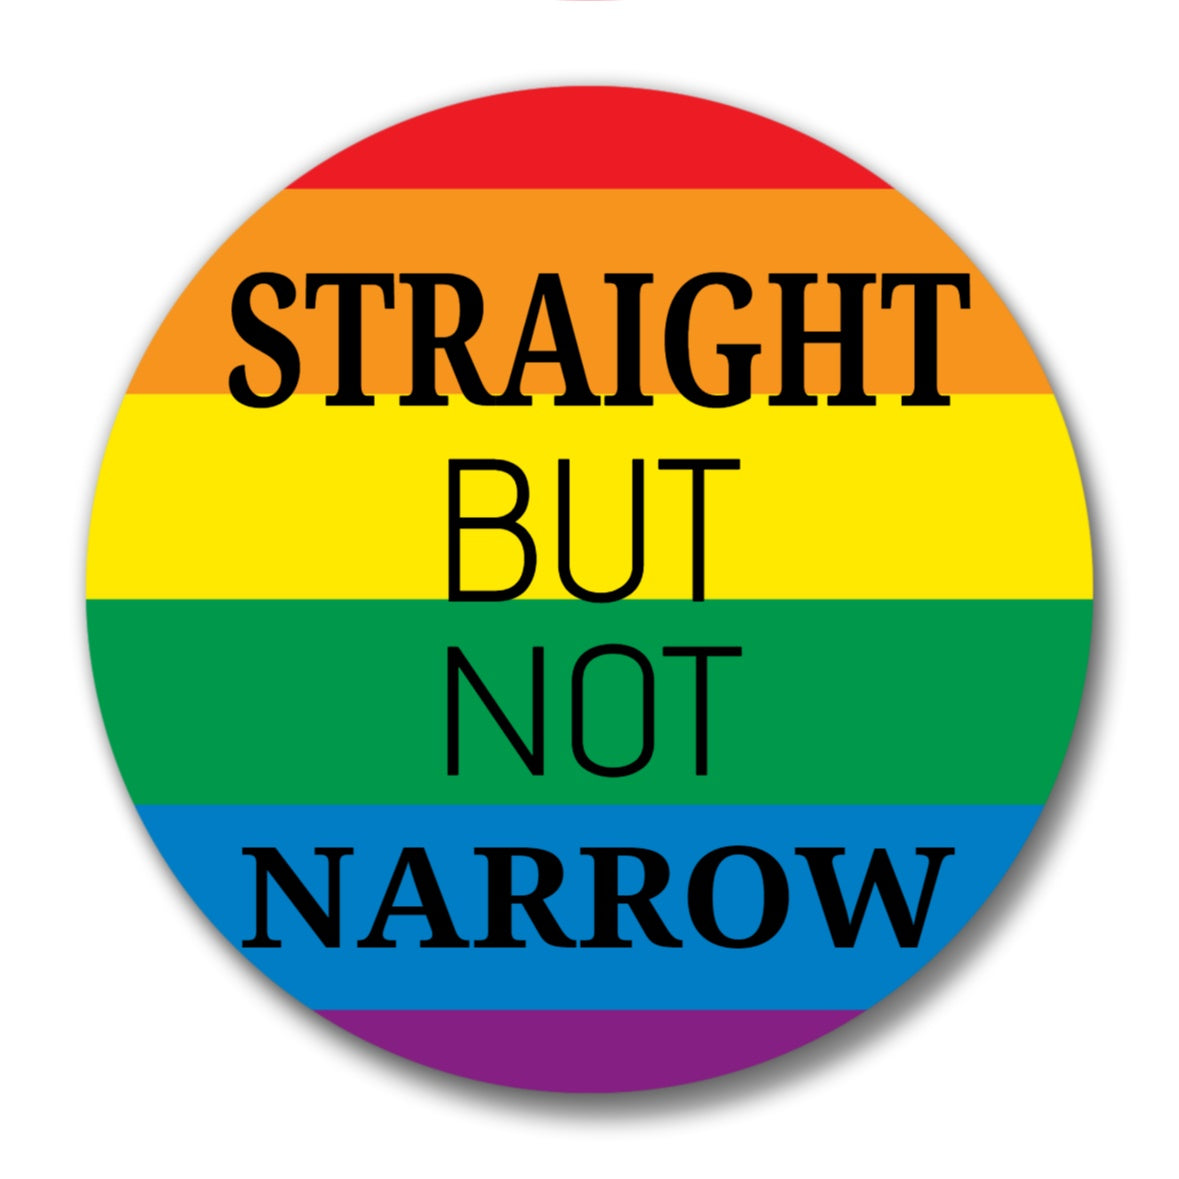 STRAIGHT but not NARROW